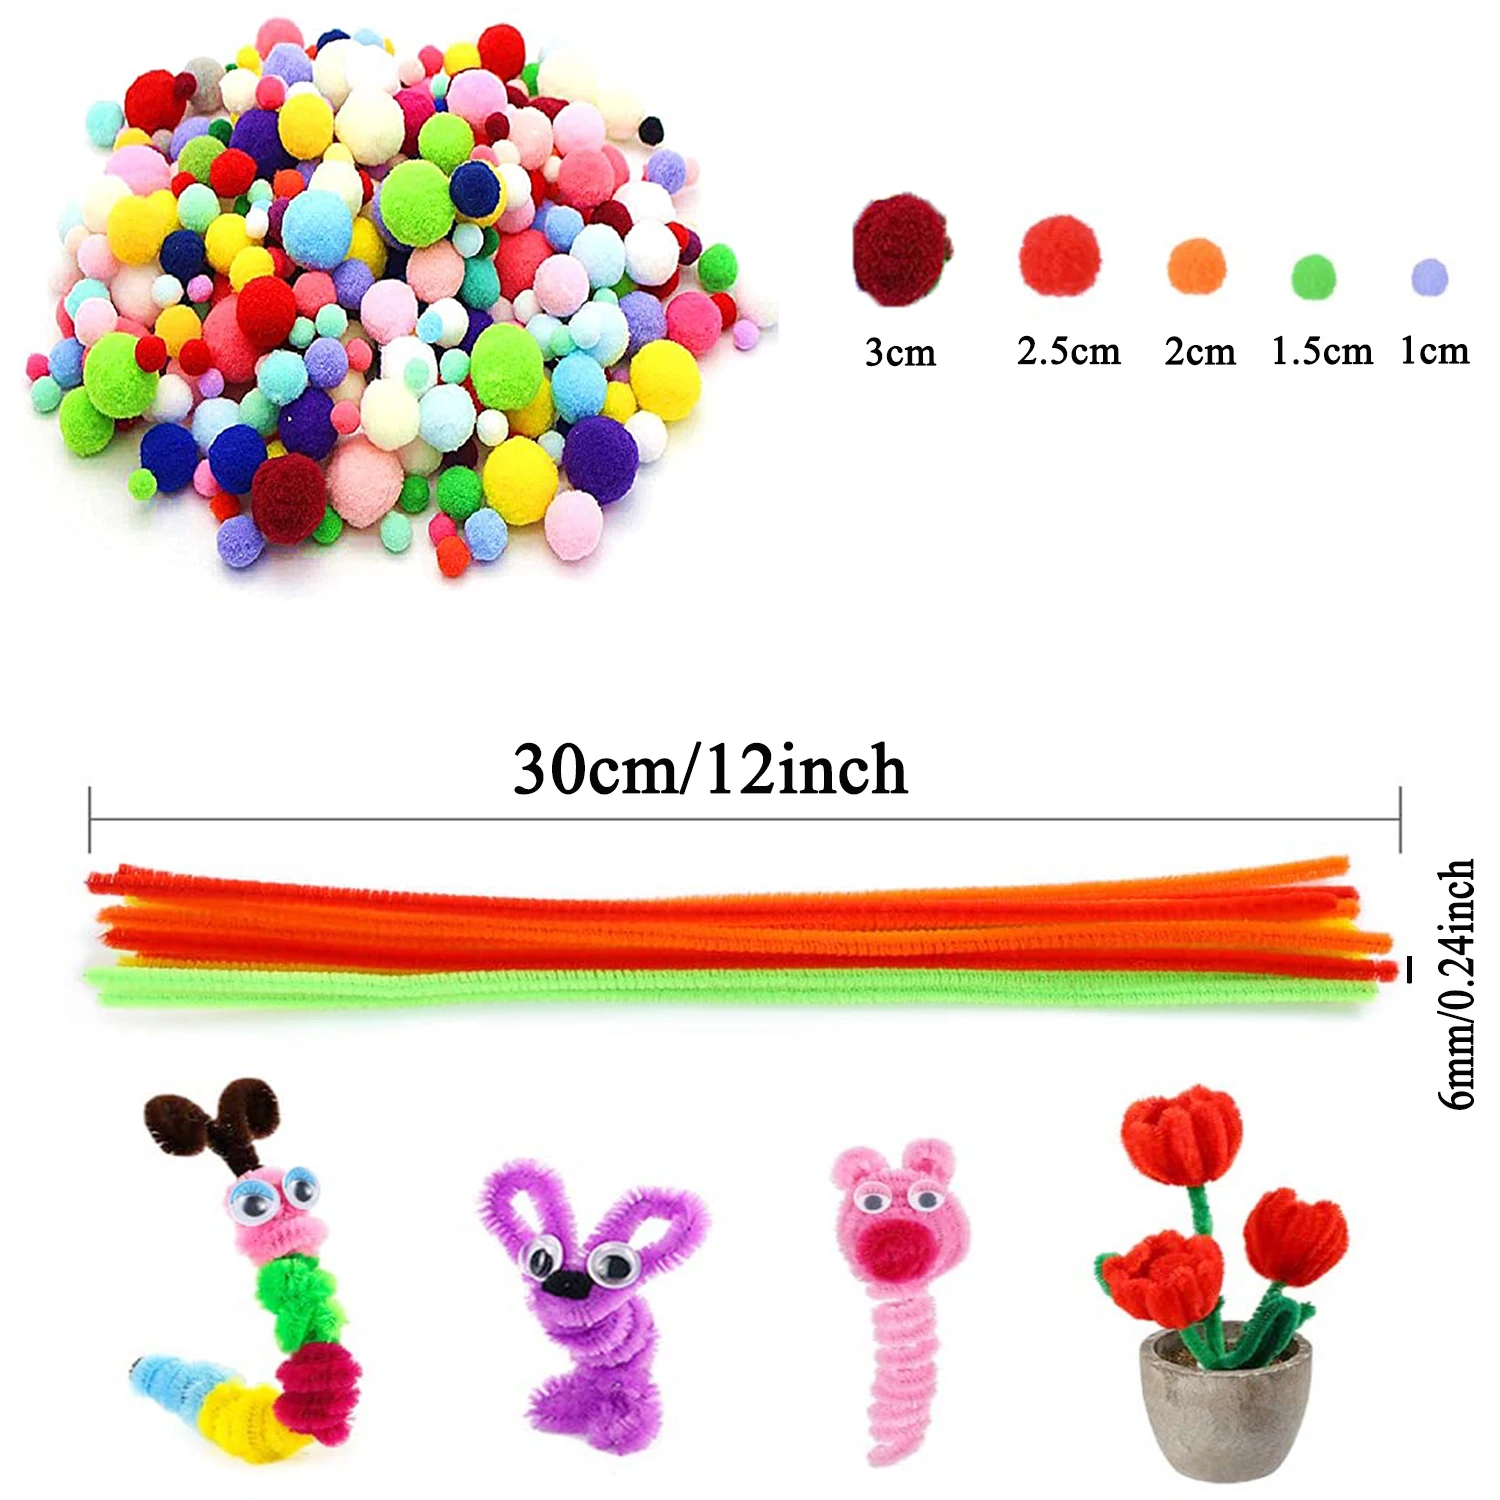 Including 200 Pcs Pom Poms Willcomes Creative 450 Pieces Pipe Cleaners Set 150 Pcs Self-Sticking Wiggle Googly Eyes and 100 Pcs Chenille Stems for Craft and Hobby Supplies 